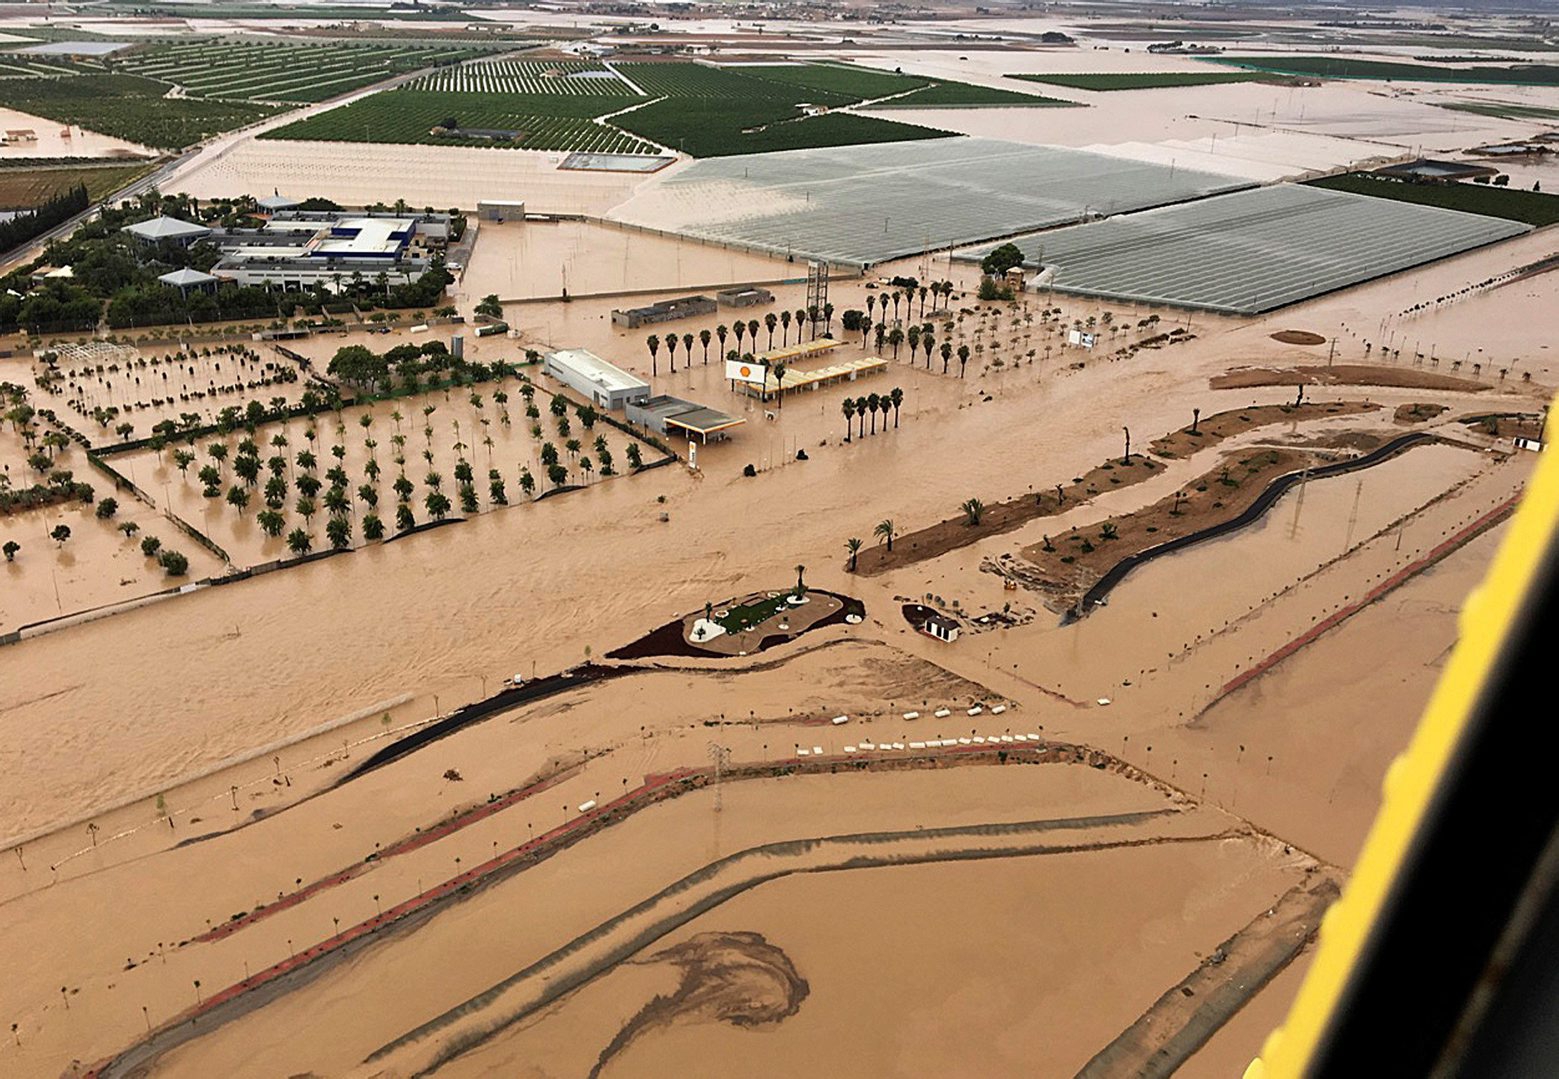 epa07839190 A handout image provided by the Security and Emergencies Bureau shows an aerial view of floods in the municipality of Los Alcazares after torrential rains in Murcia, eastern Spain, 13 September 2019. The number of victims of the 'gota fria' (cold drop) phenomenon in the Mediterranean coast has risen to three. The eastern regions of Valencia and Alicante continue under red level alert due to torrential rains while the State Meteorological Agency AEMET has reduced the alert in Murcia to orange level.  EPA/Security and Emergencies Bureau /HANDOUT  HANDOUT EDITORIAL USE ONLY/NO SALES SPAIN WEATHER